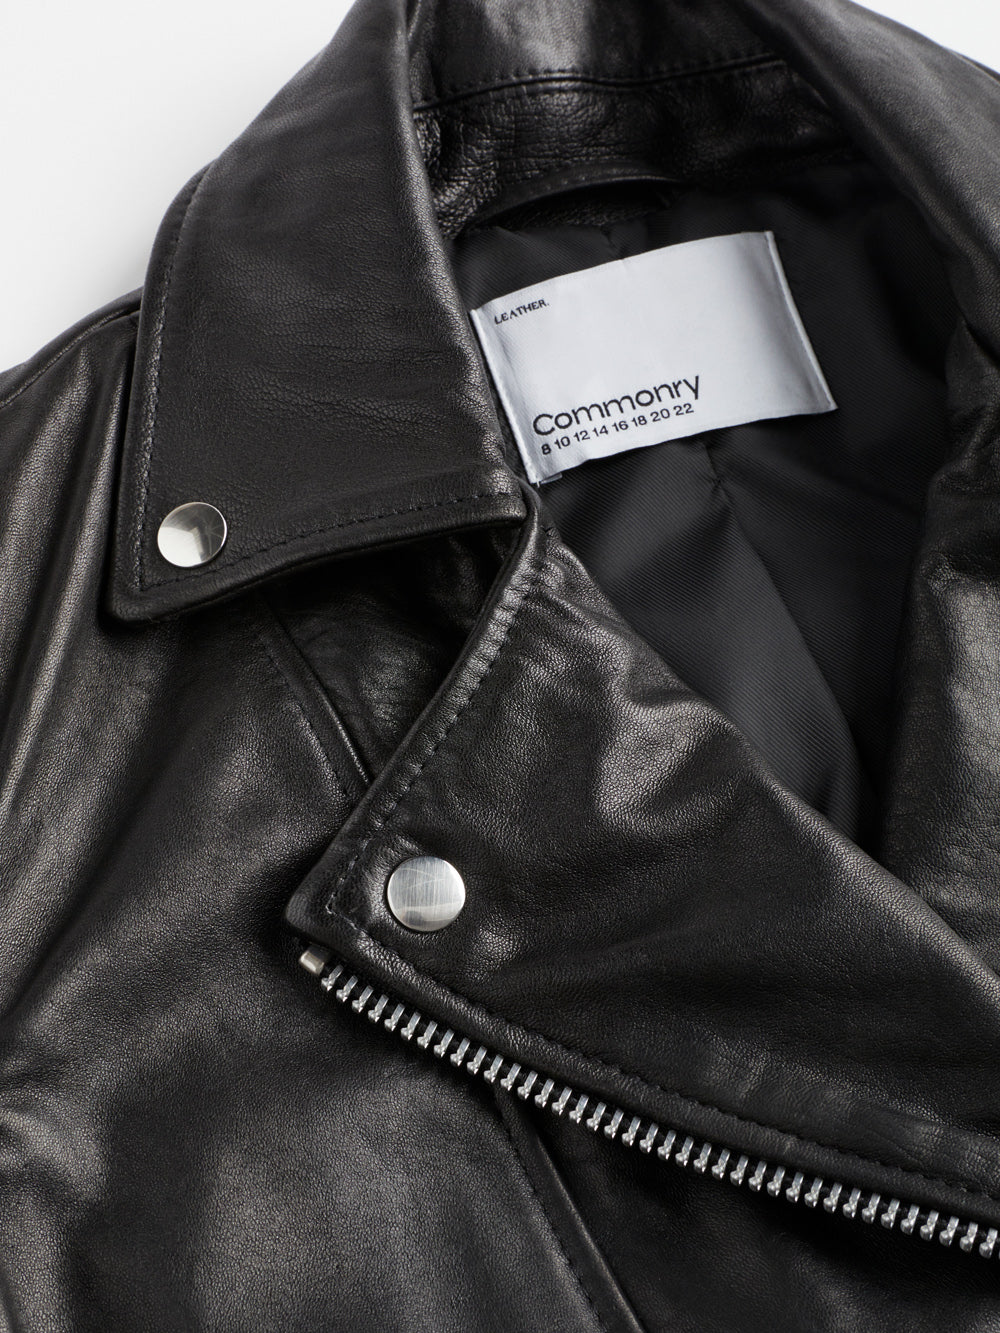 The Leather Biker Jacket | Commonry